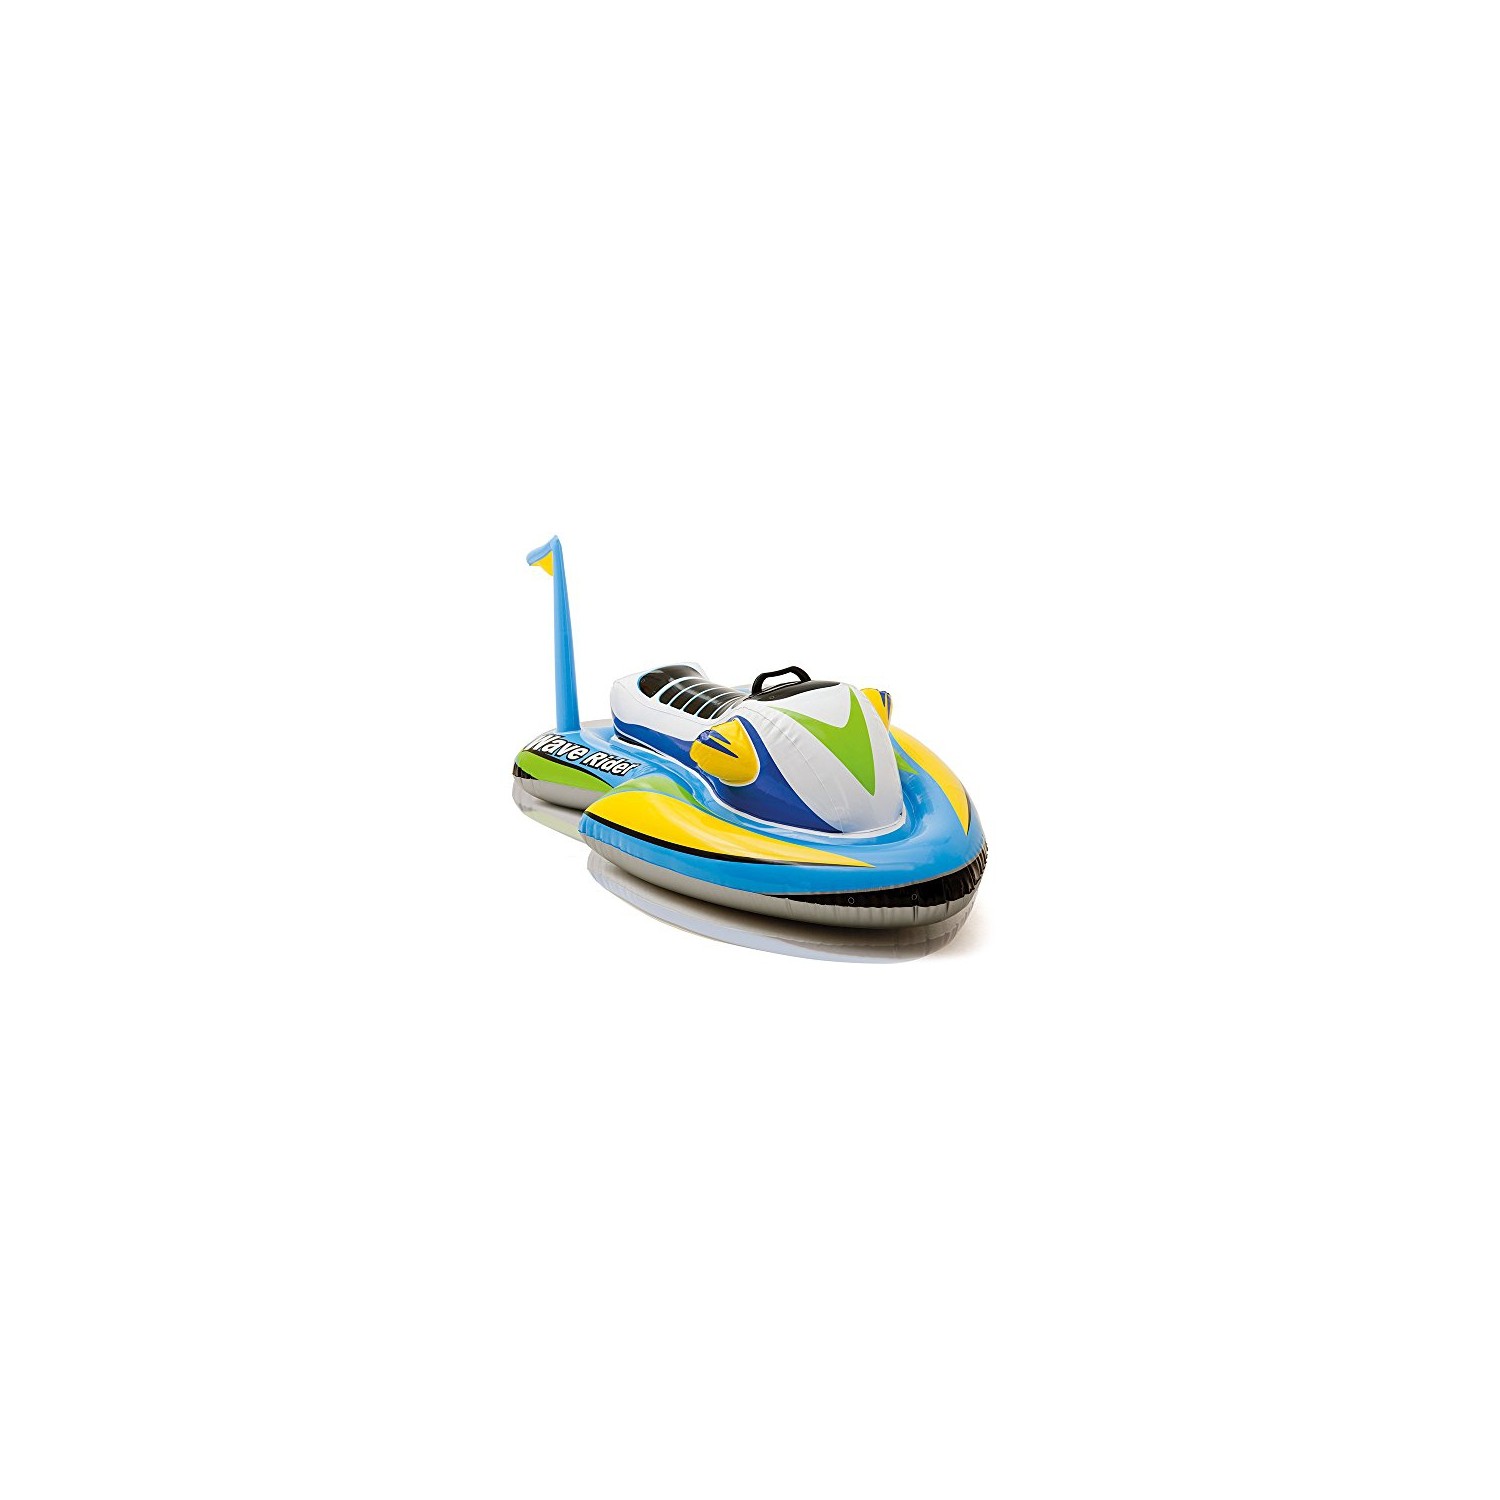 Intex Wave Rider Ride-On, 46" X 30.5", For Ages 3+